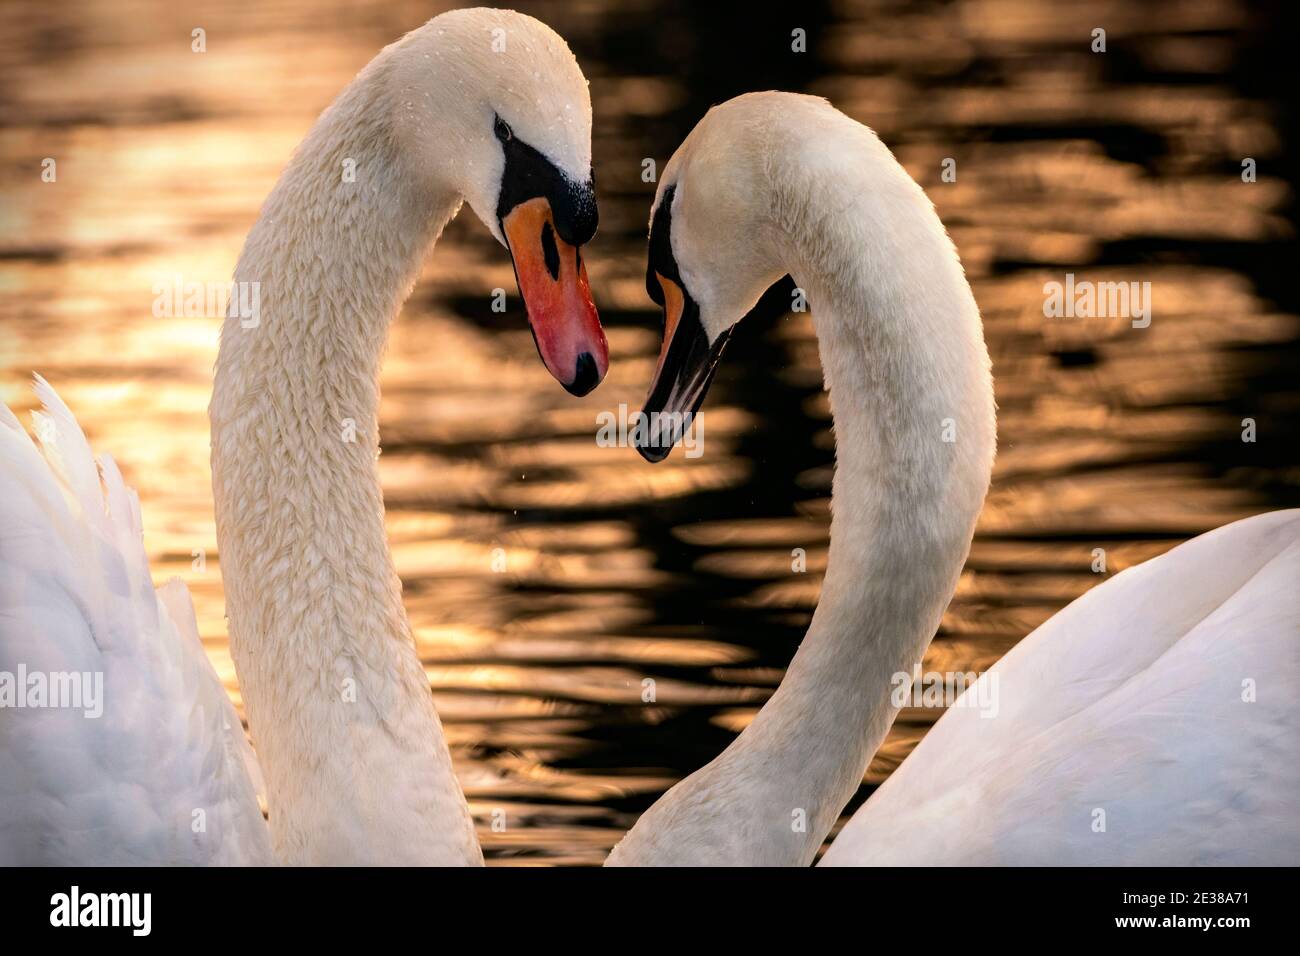 Mute Swans forming a heart shape with their necks at sunset Stock Photo